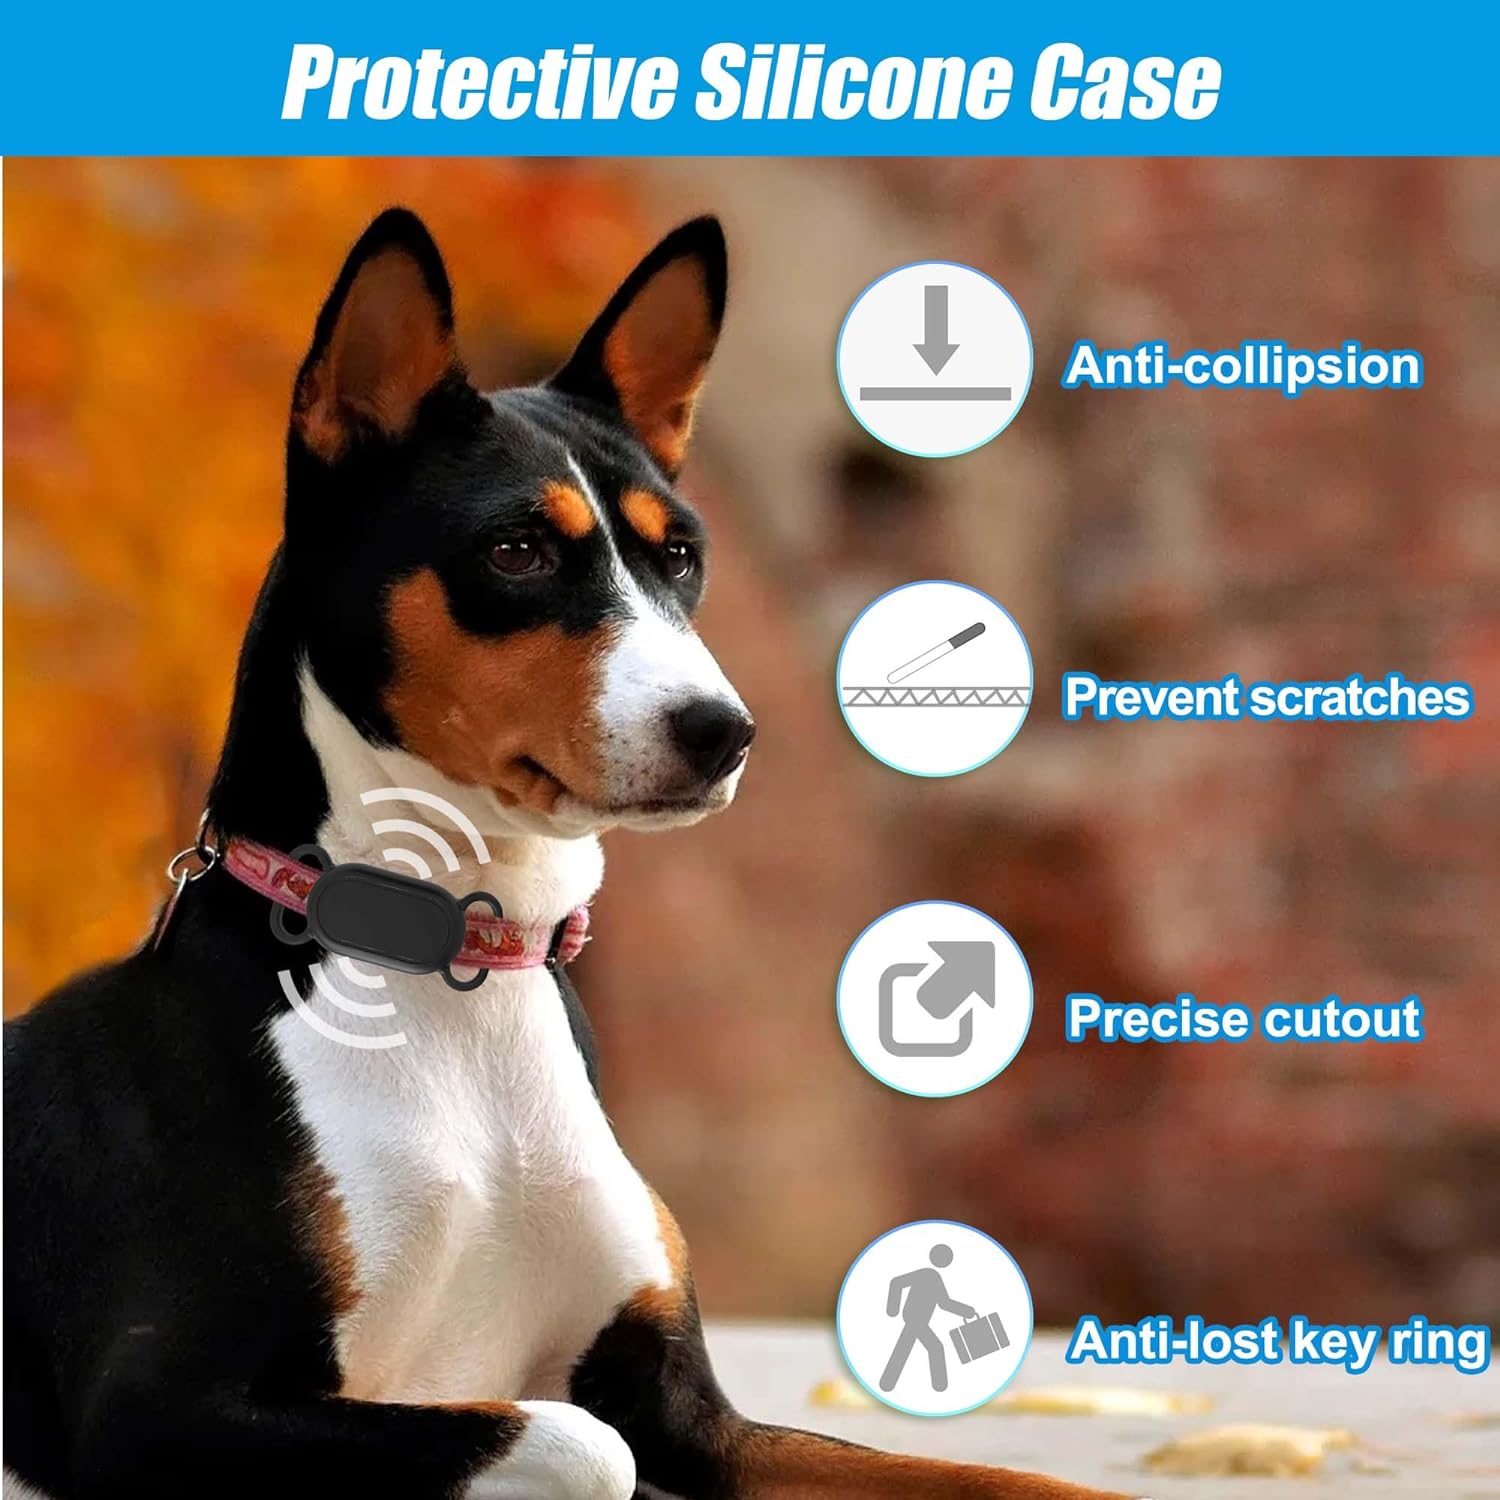 2PCS Silicone Case for Samsung Smart Tag 2 for Dog Collar, Protective Cover Sleeve Compatible with Samsung Smart Tag 2 Tracker, Item Finder Accessories, Tracking Devices Protector for Securing Holding